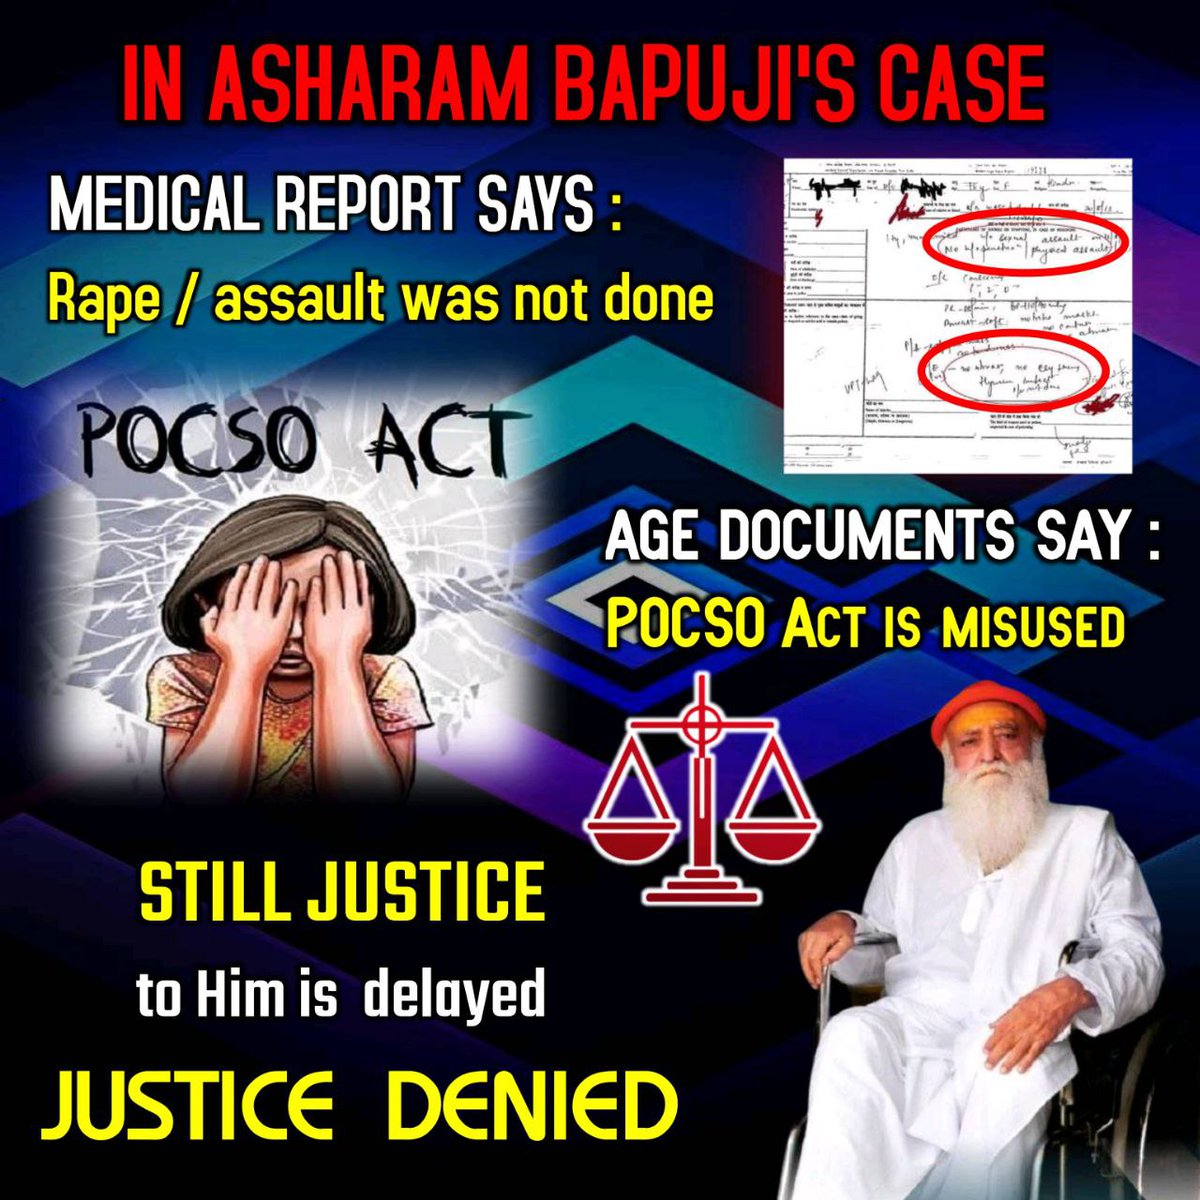 @gdshariom I don't understand how can an  innocent saint like Sant Shri Asharamji Bapu be trapped, jailed and tortured for past 8 yrs without any evidence. How long will this carry on??? #निर्दोषता_के_अनेकों_प्रमाण